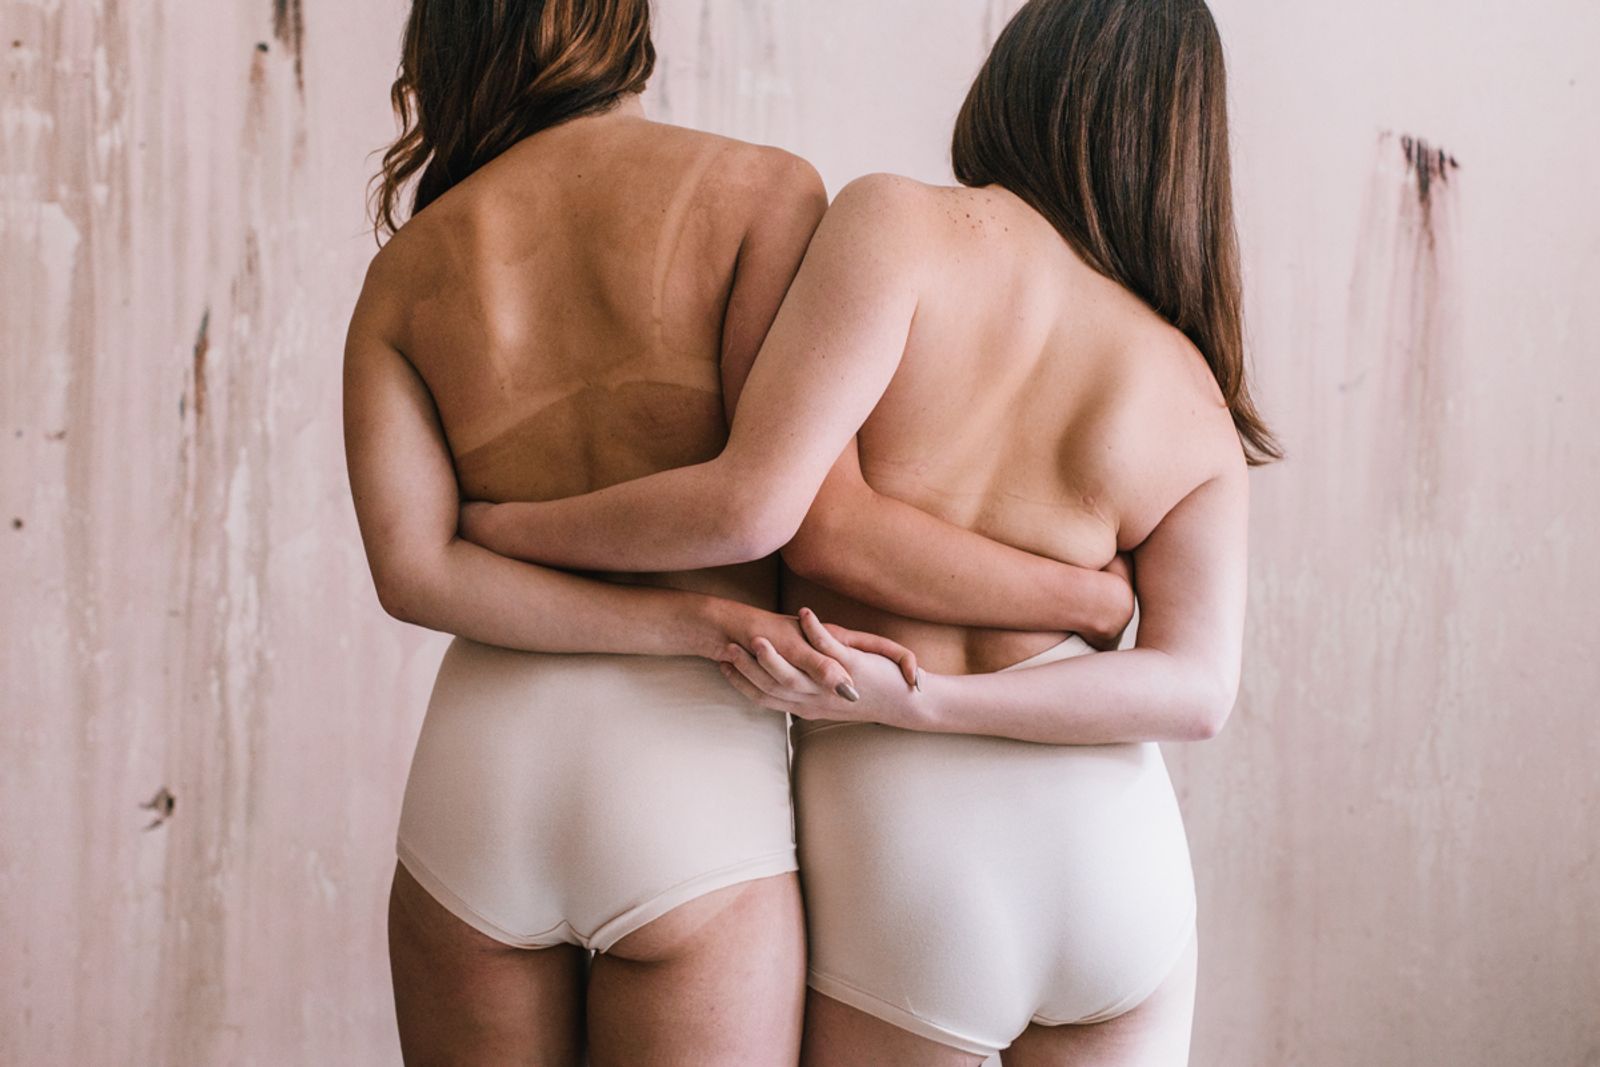 © Victoria Holguin - Image from the Ellas, being women photography project